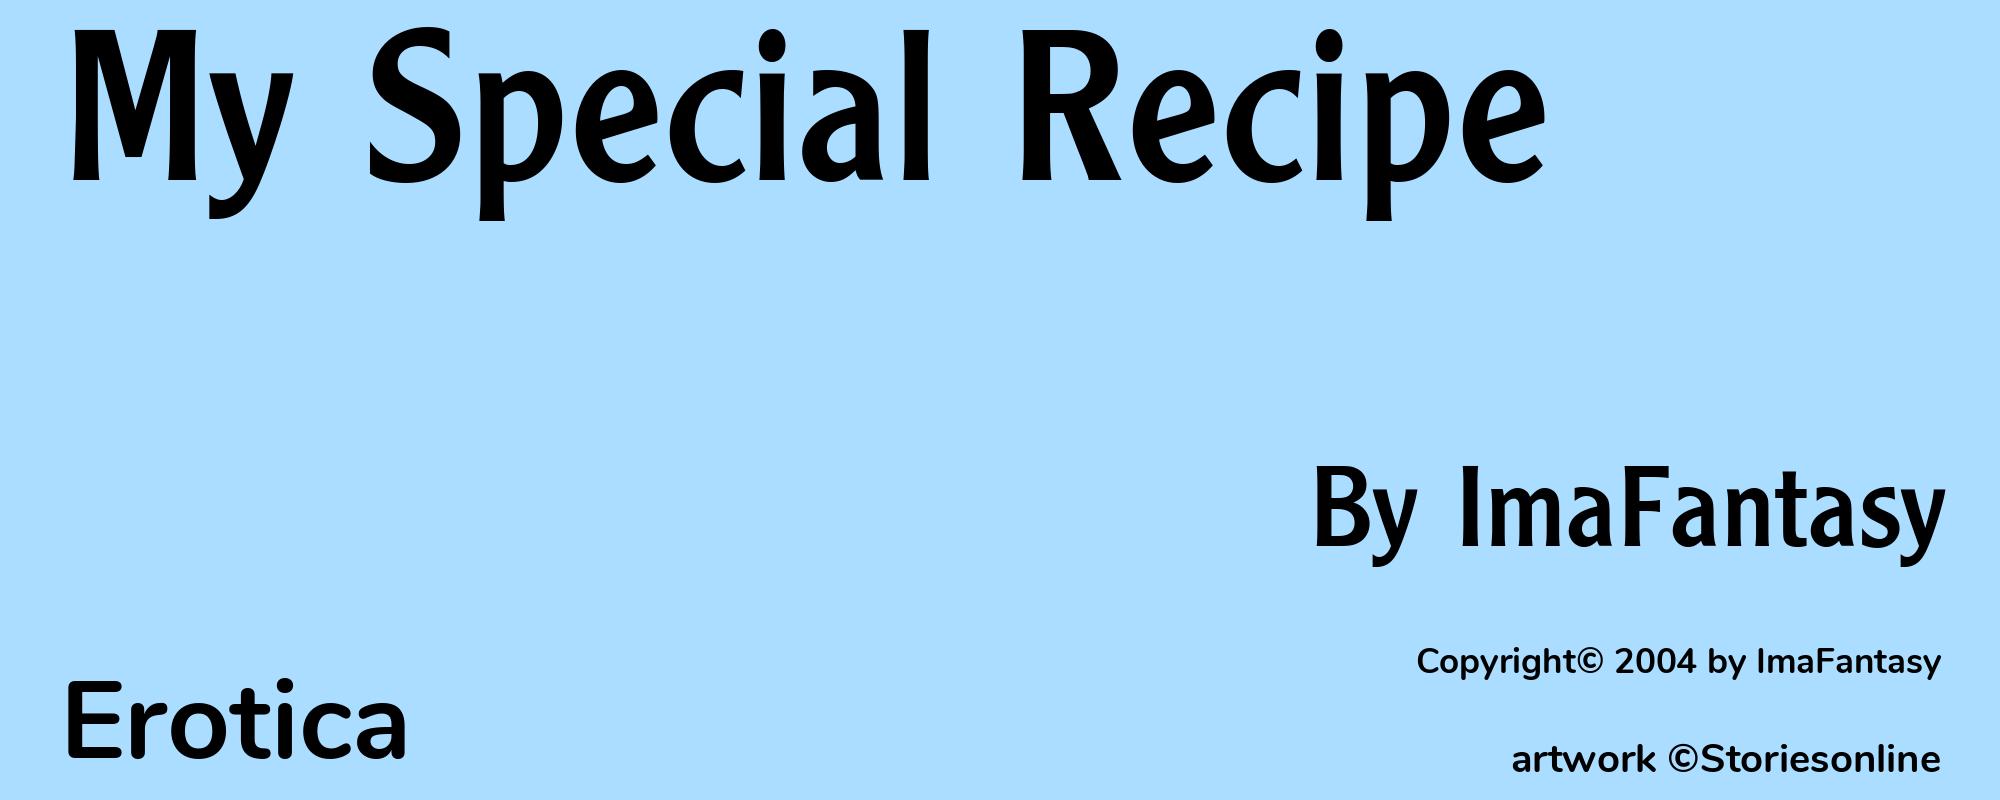 My Special Recipe - Cover